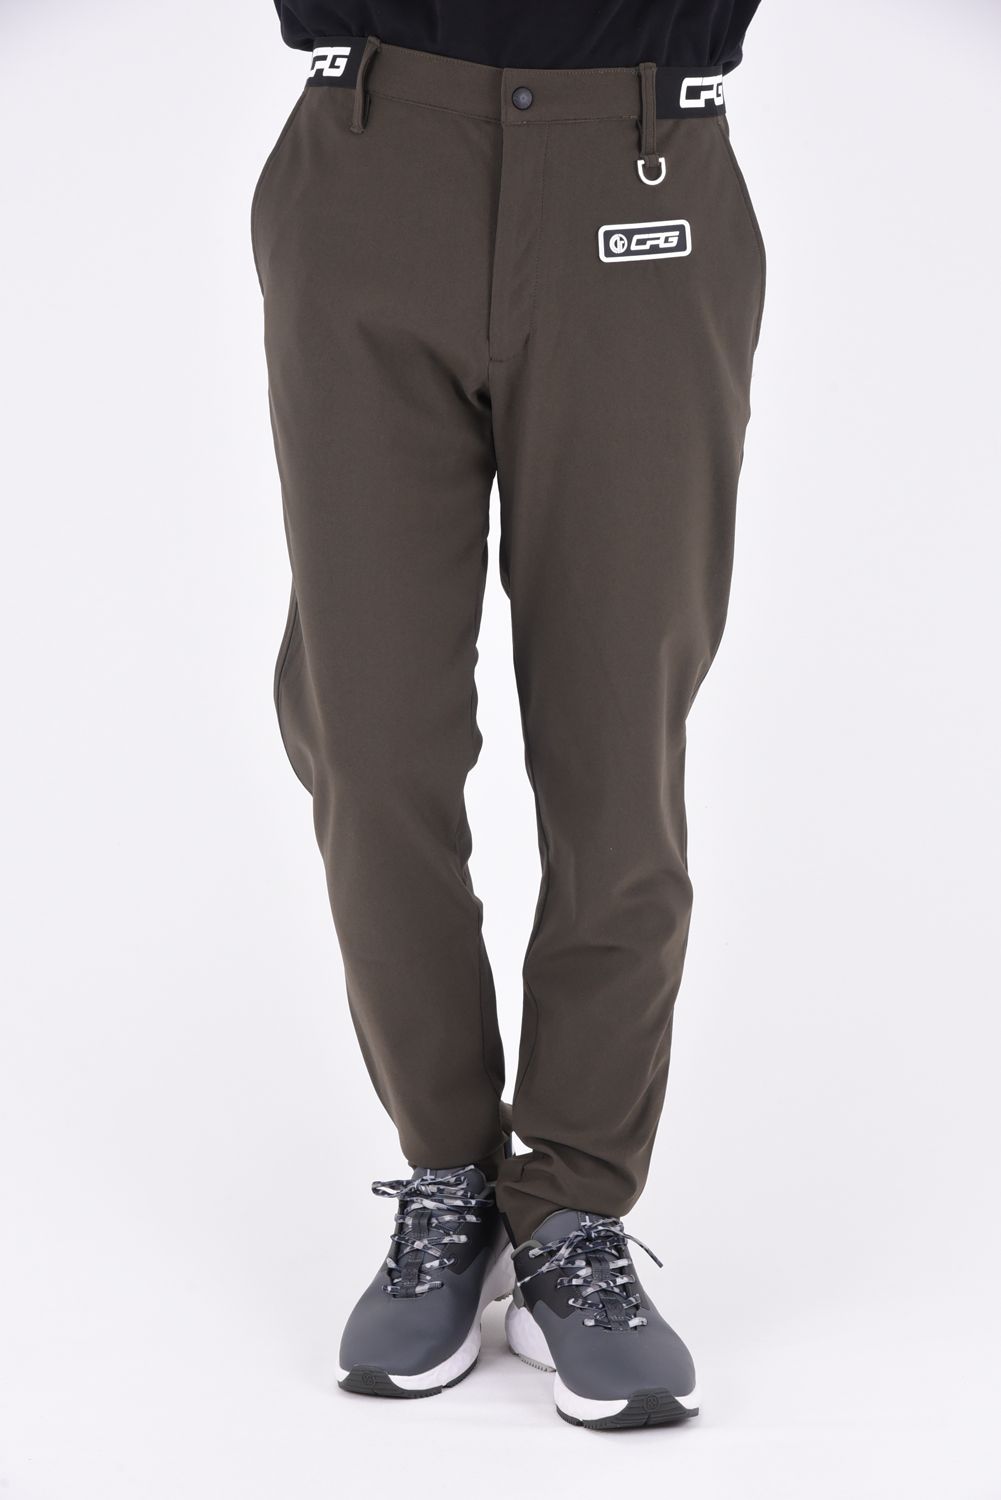 CPG GOLF - STRETCH TROUSER PANTS / スーパーストレッチ スタンダード